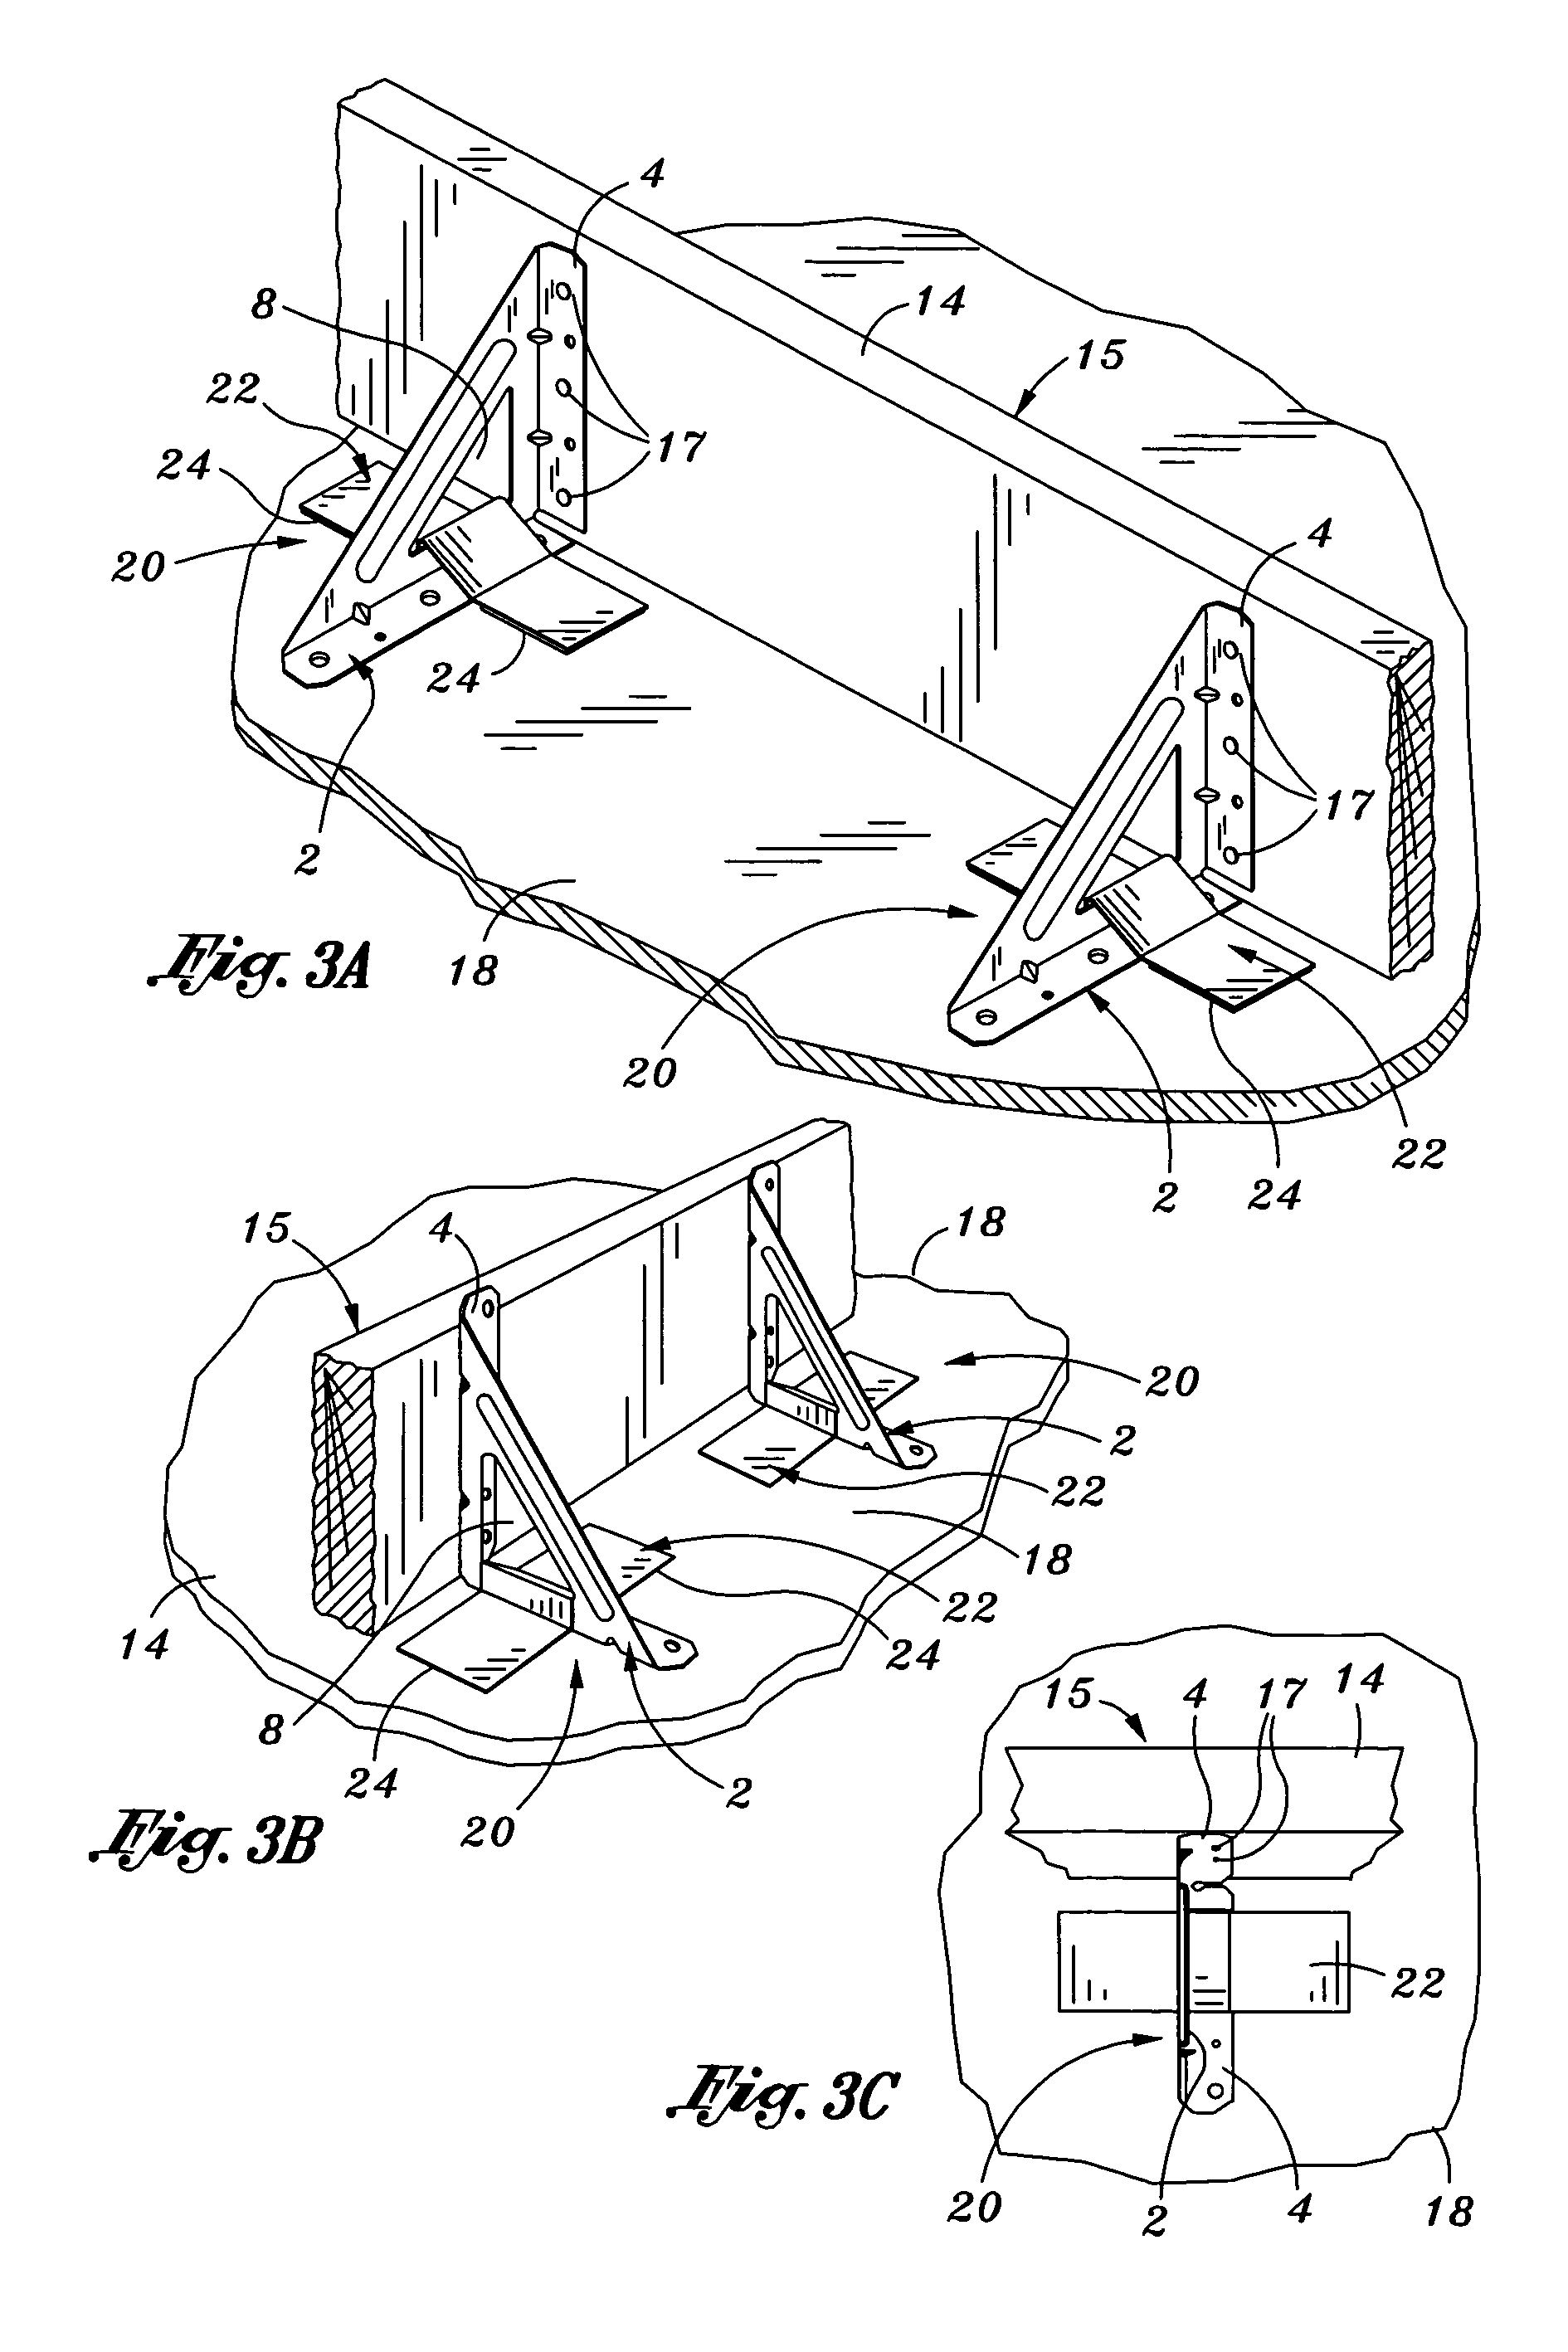 Non-destructive form brackets and methods of using the same